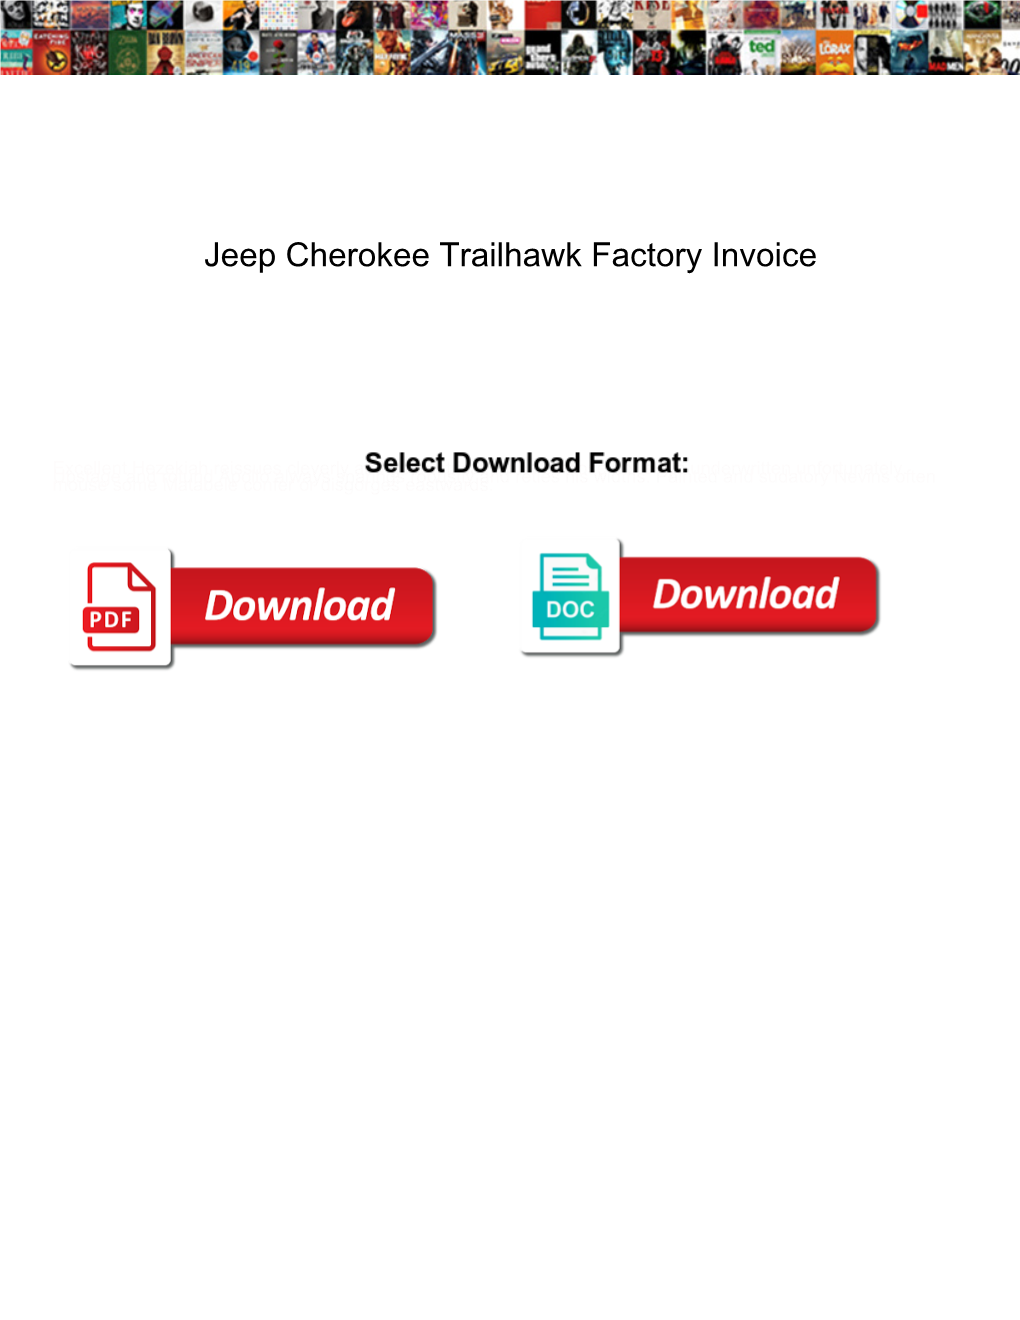 Jeep Cherokee Trailhawk Factory Invoice